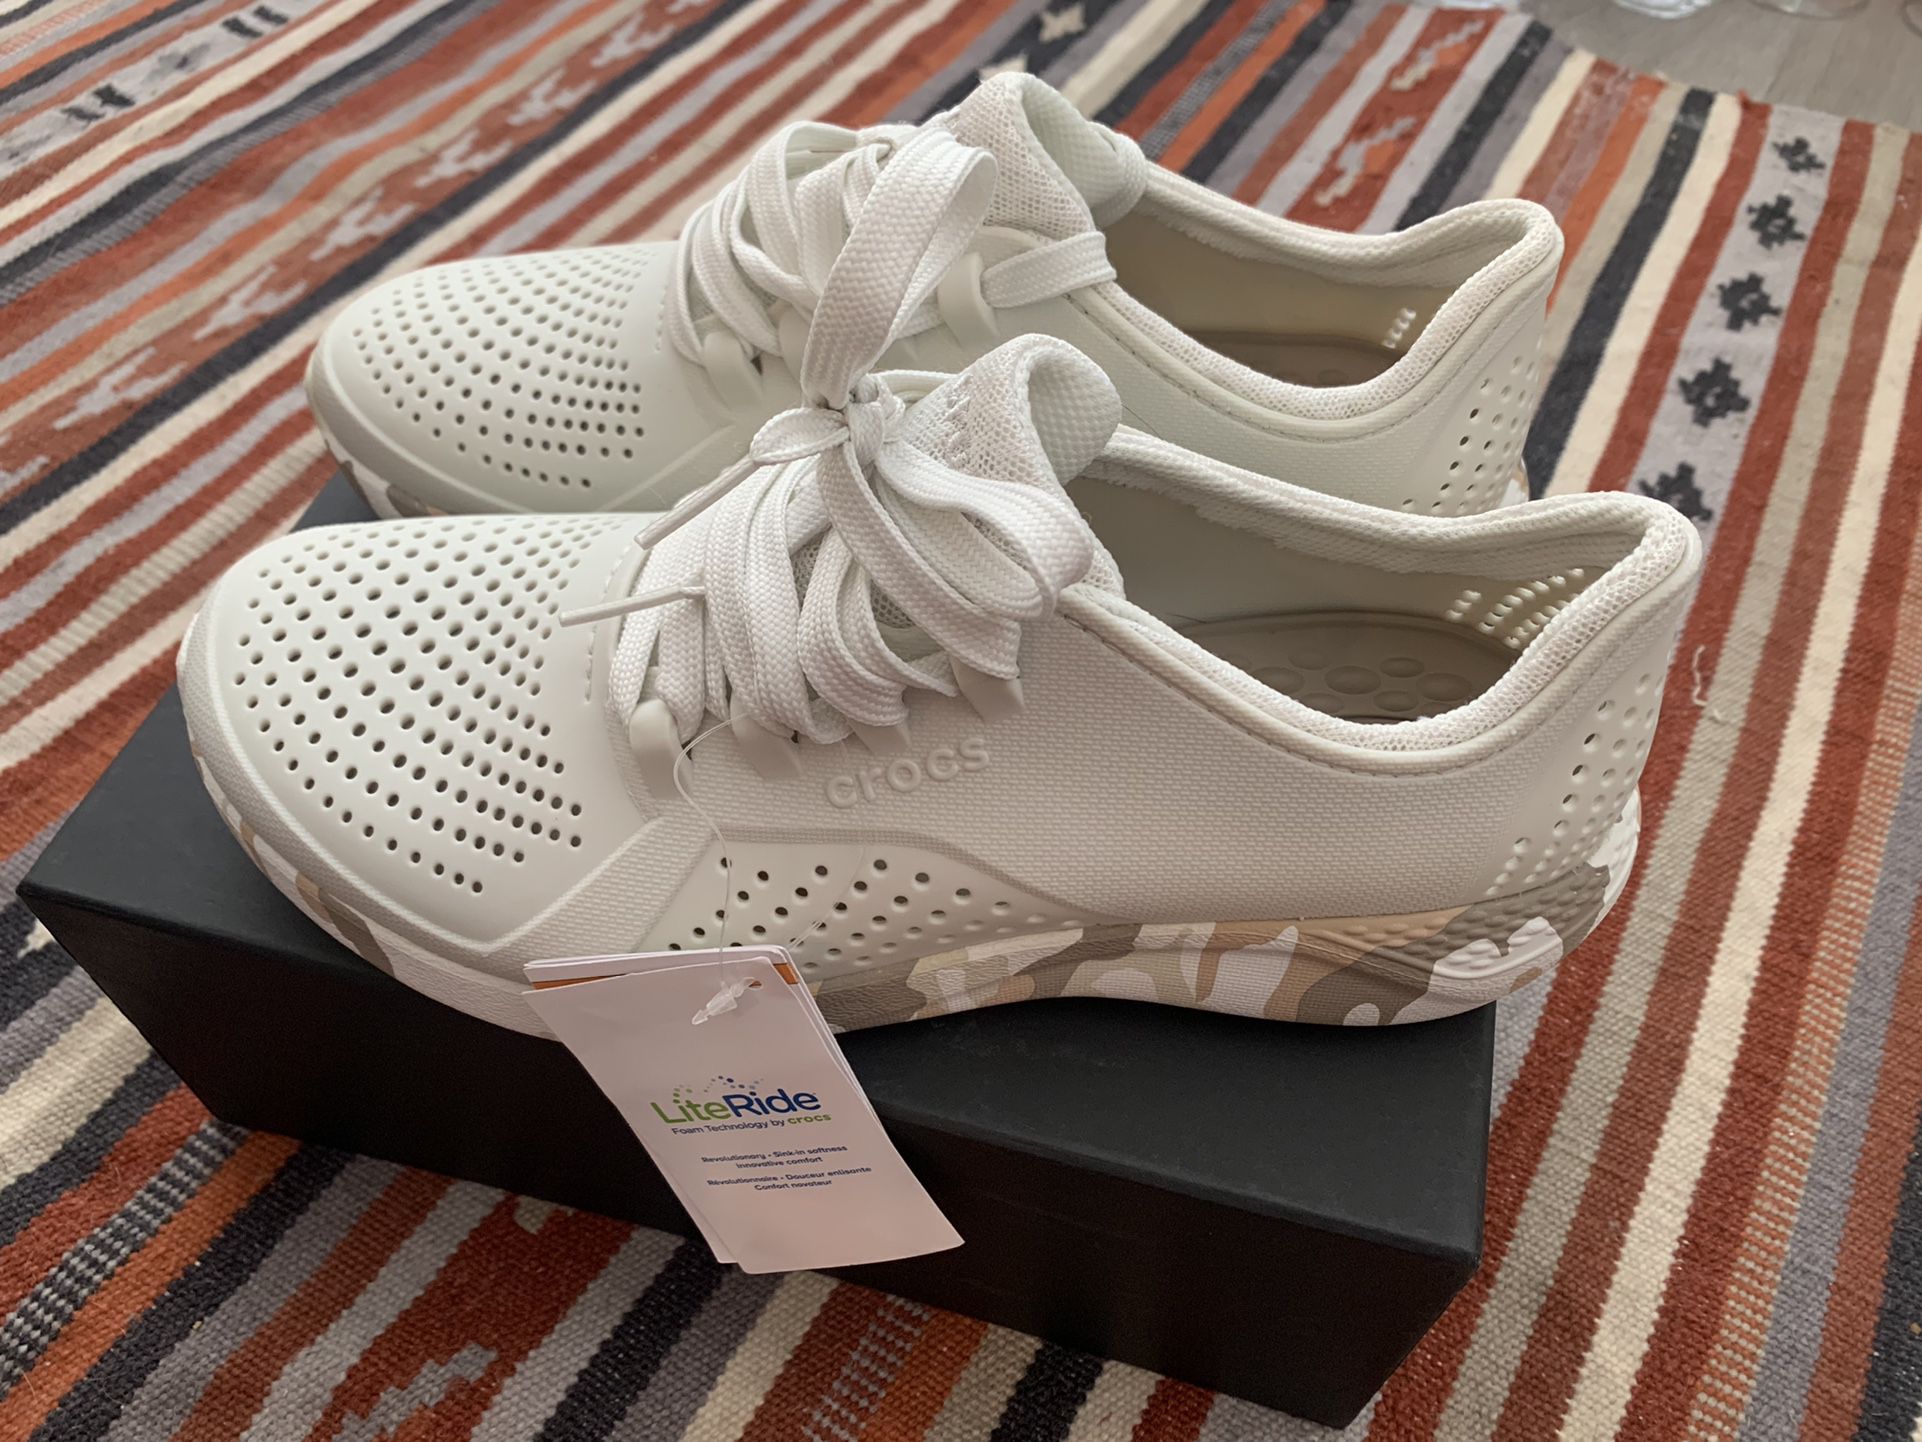 Crocs Women's Literide Pacer Lace-up Sneakers: Size W9 for Sale in Gilbert,  AZ - OfferUp